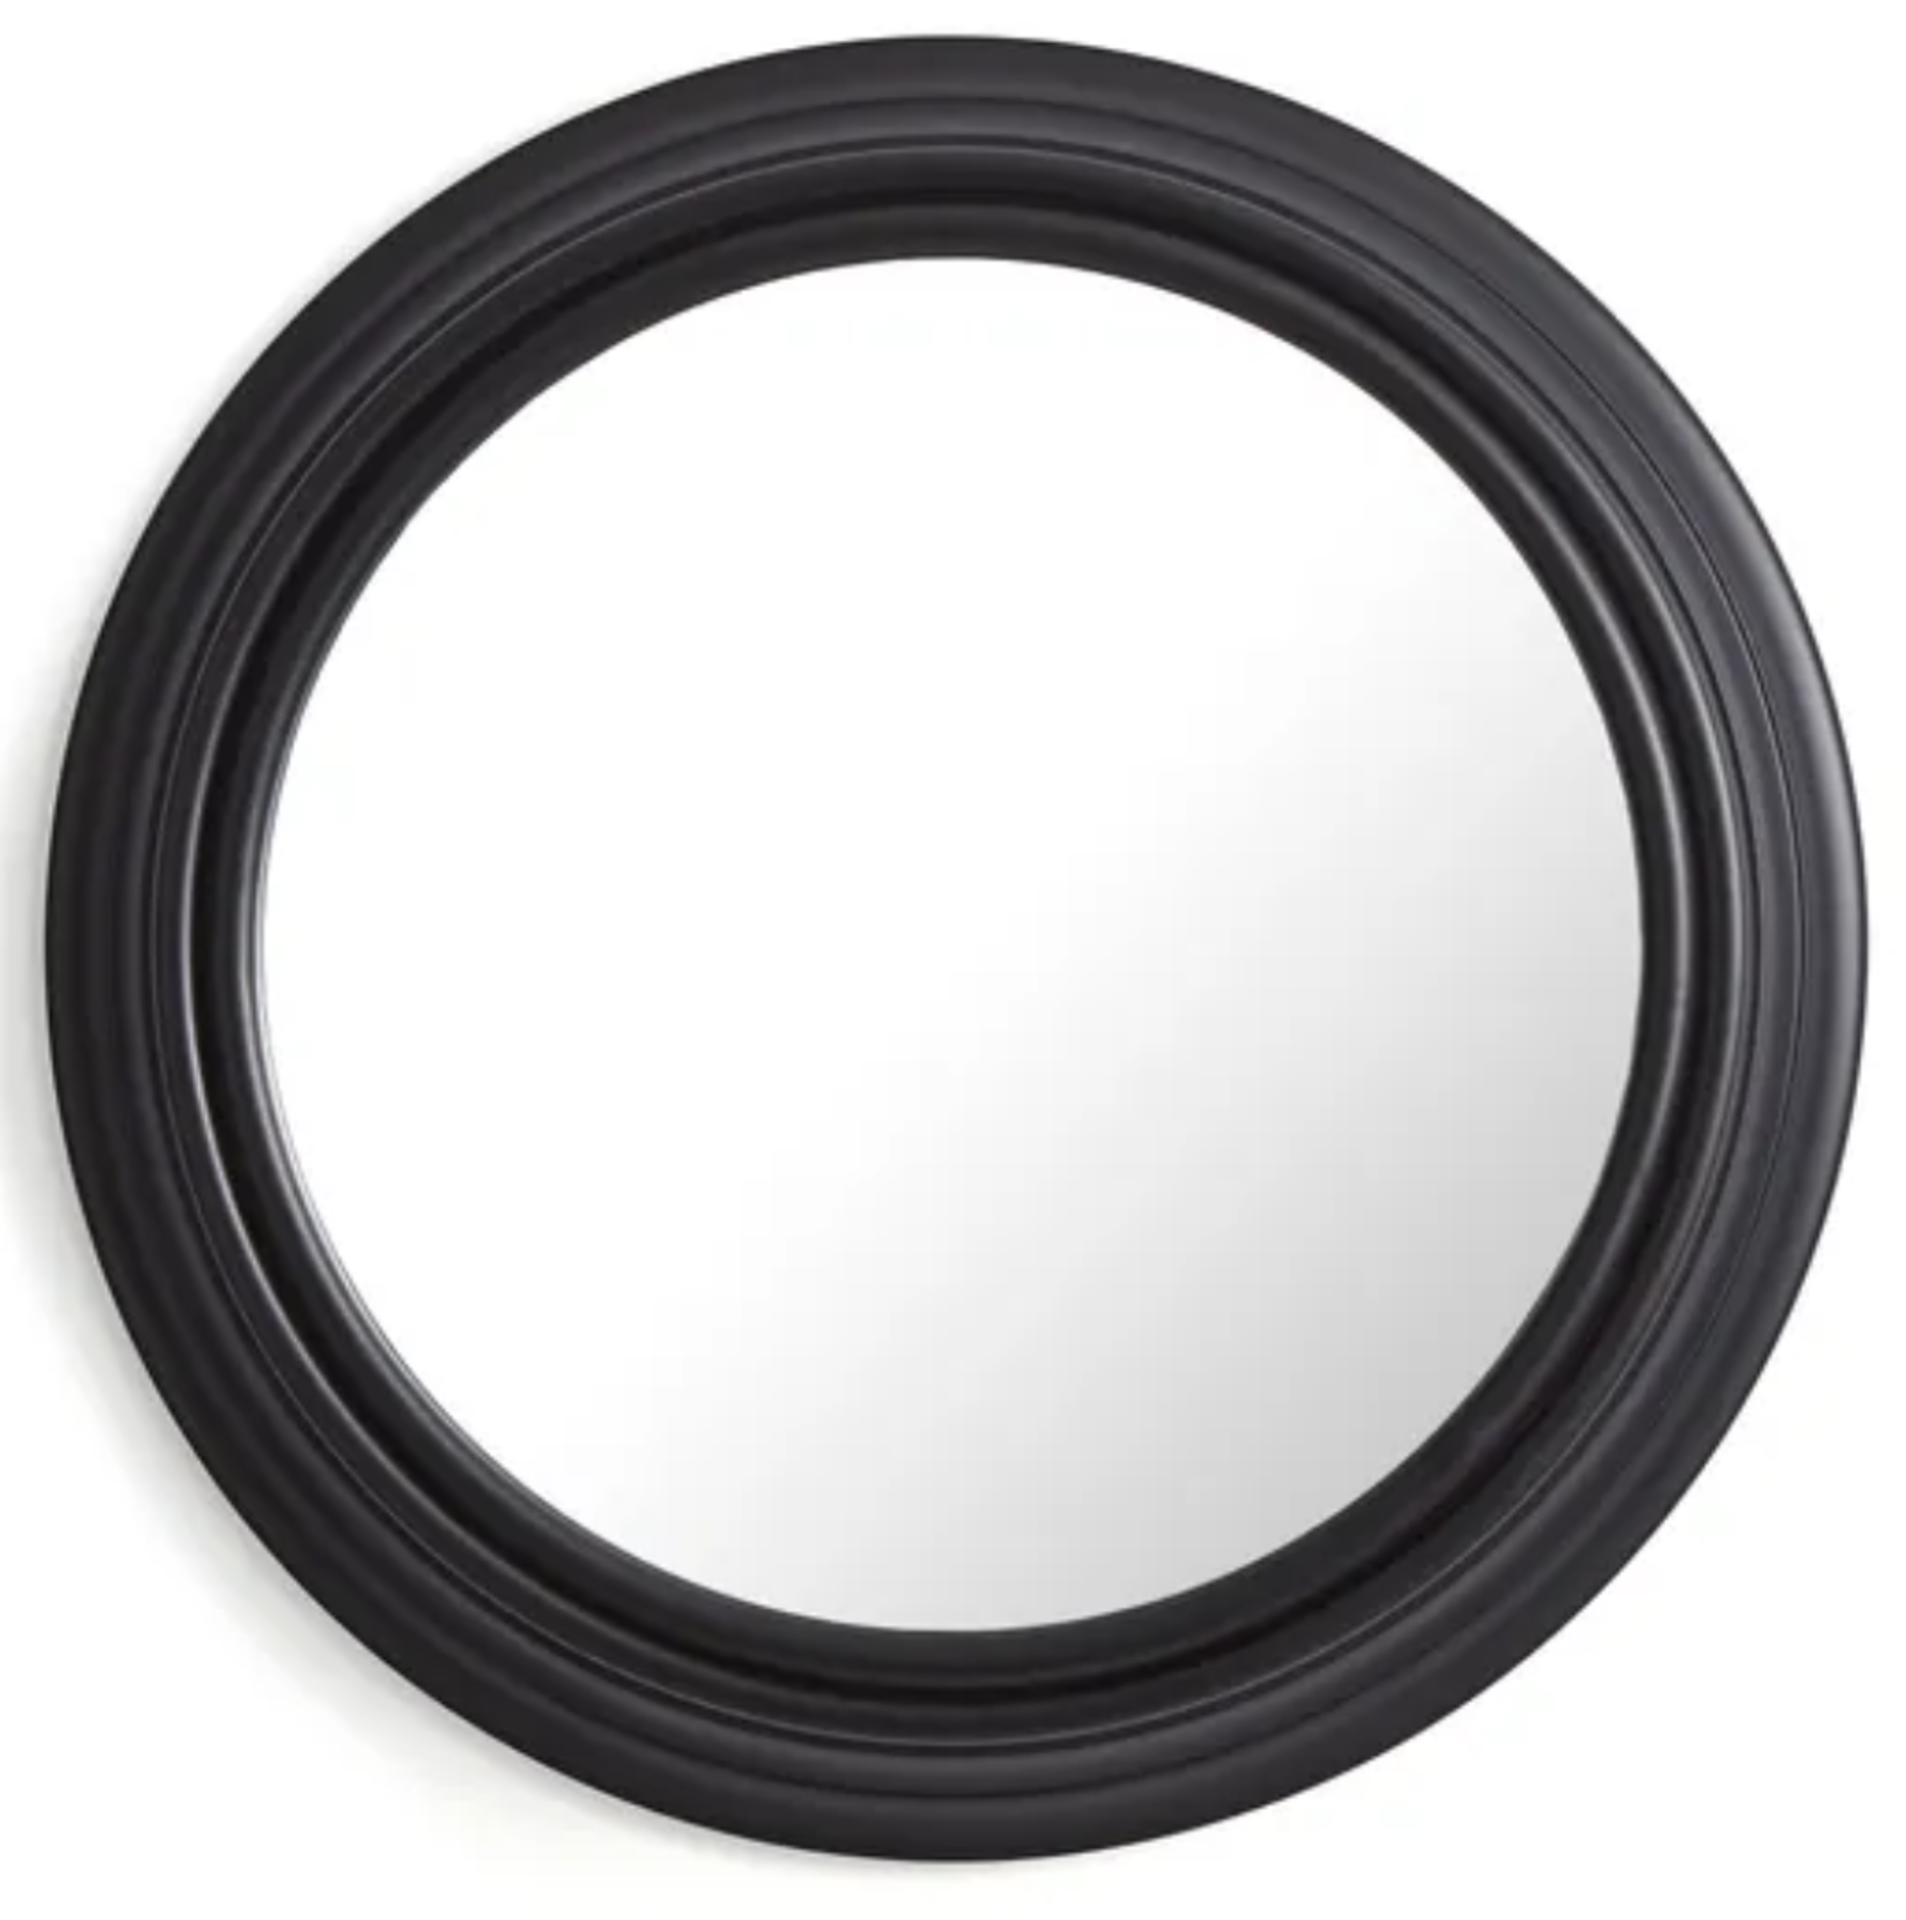 Black Round 30cm Mirror - Brand New - A contemporary and timeless circular mirror - Image 3 of 3